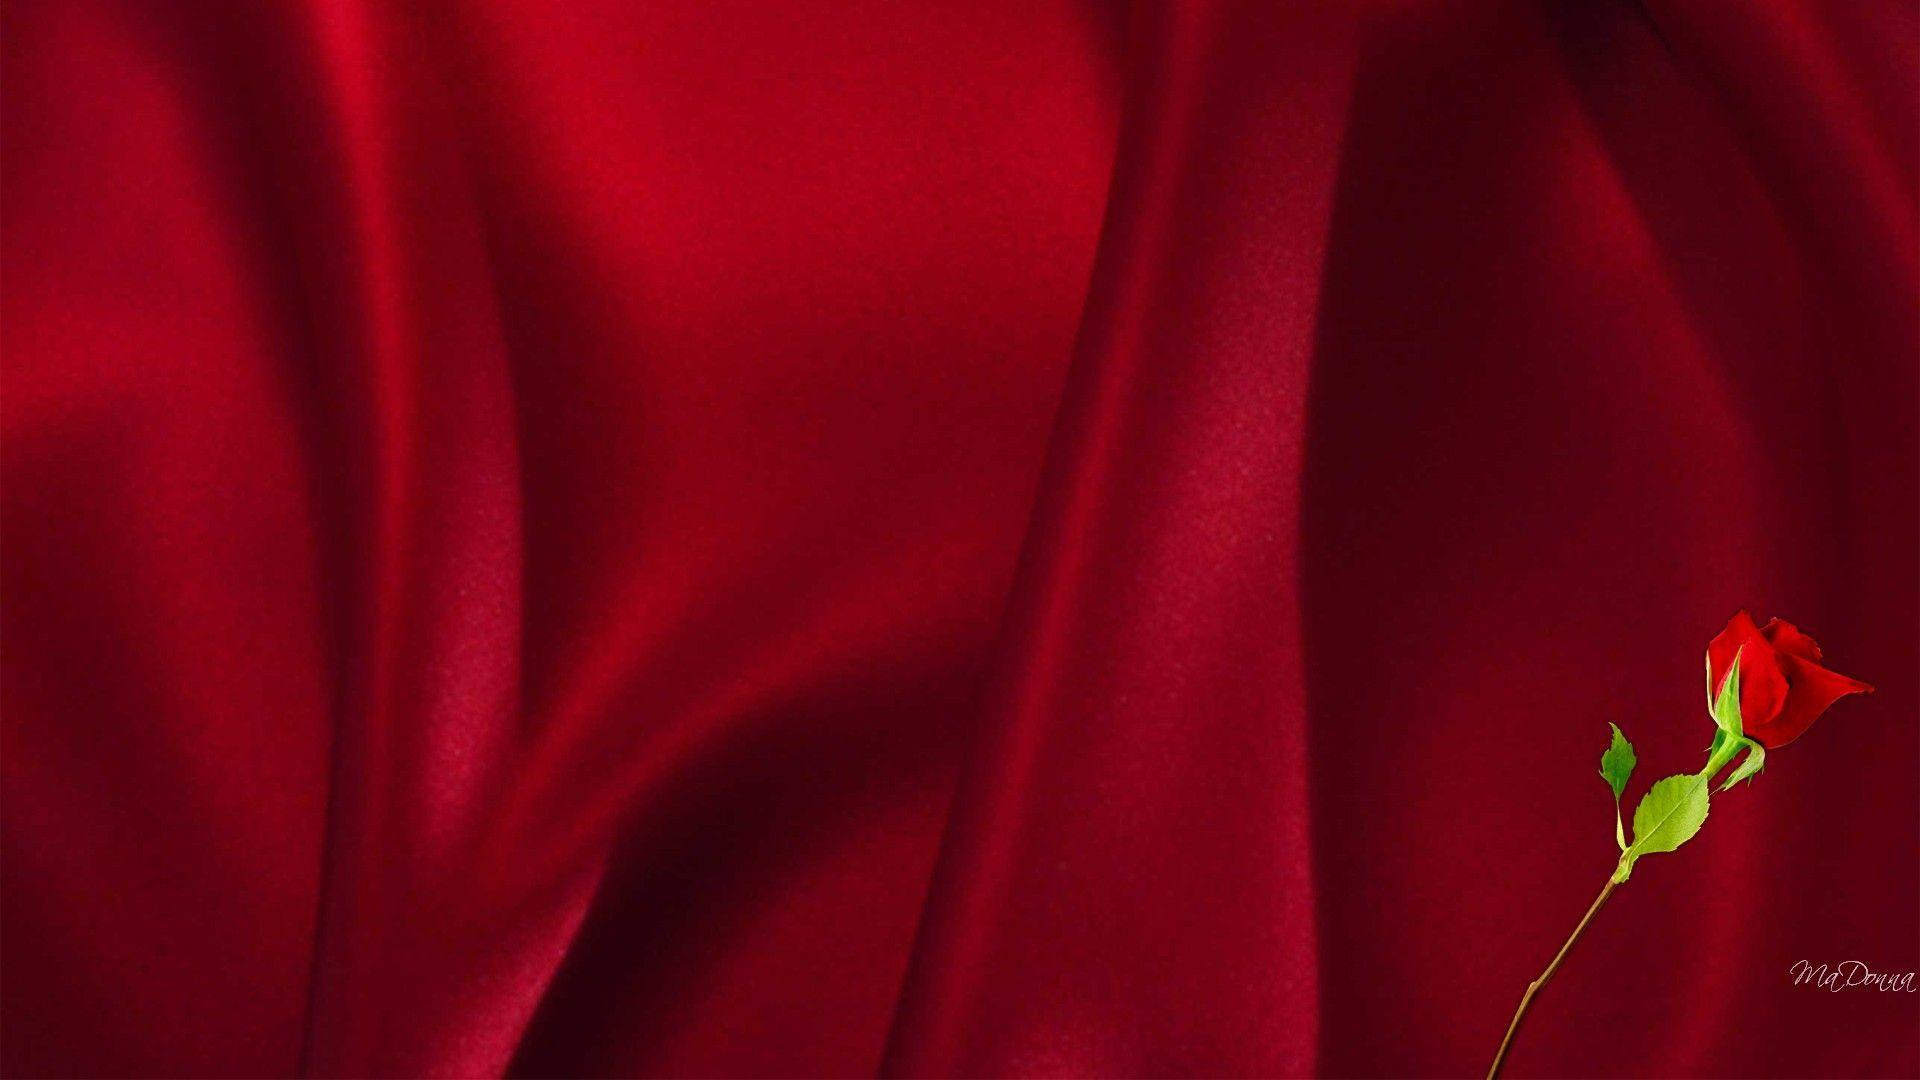 Red Satin Sheets Wallpapers 1920x1080 px Free Download